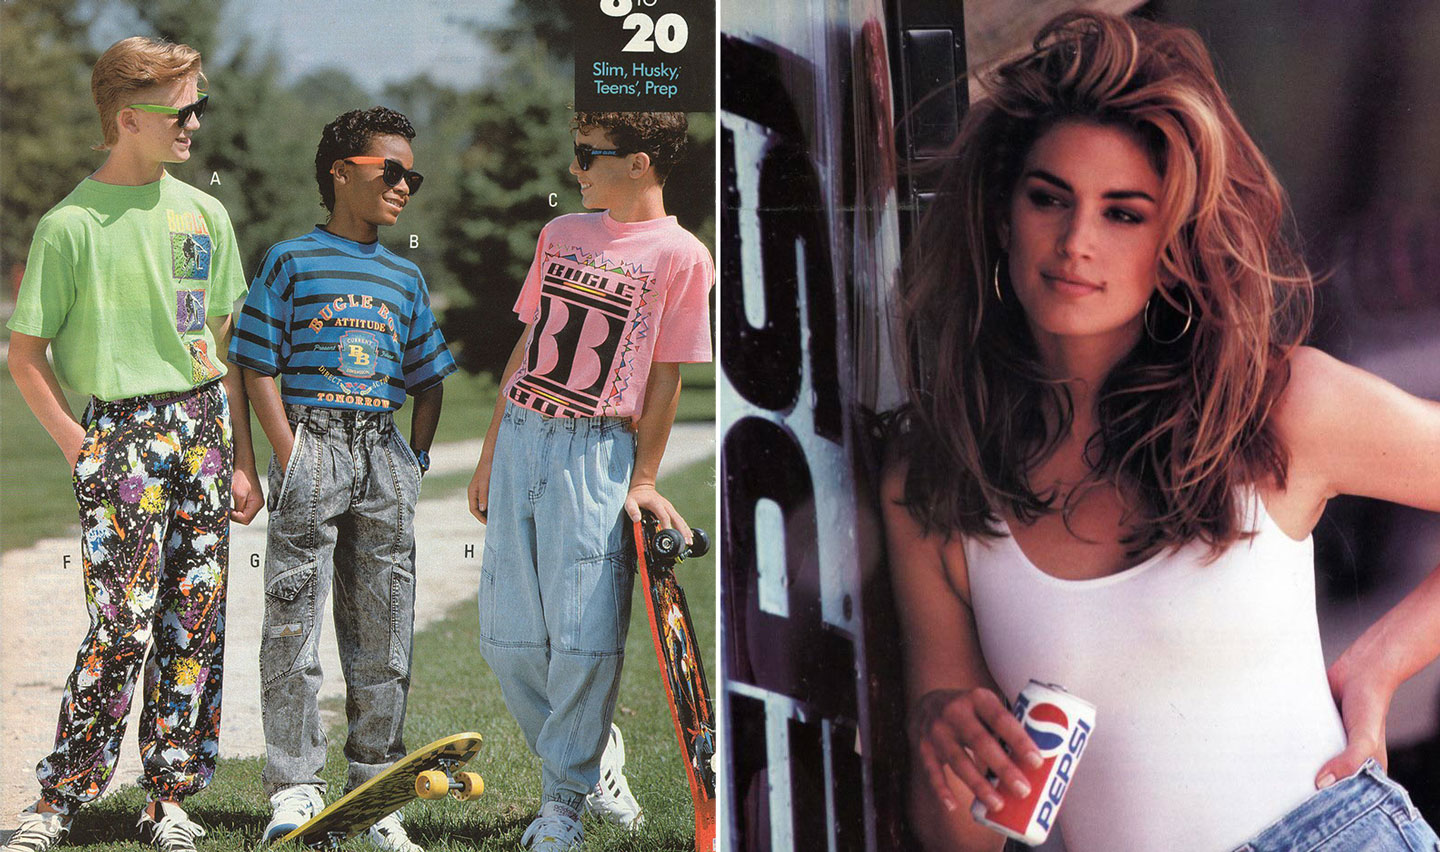 An image divided into two parts: on the left, three boys in 90s fashion, including colorful graphic tees, patterned pants, and sunglasses, pose with a skateboard; on the right, a woman with voluminous hair holds a can of Pepsi, wearing a white tank top.